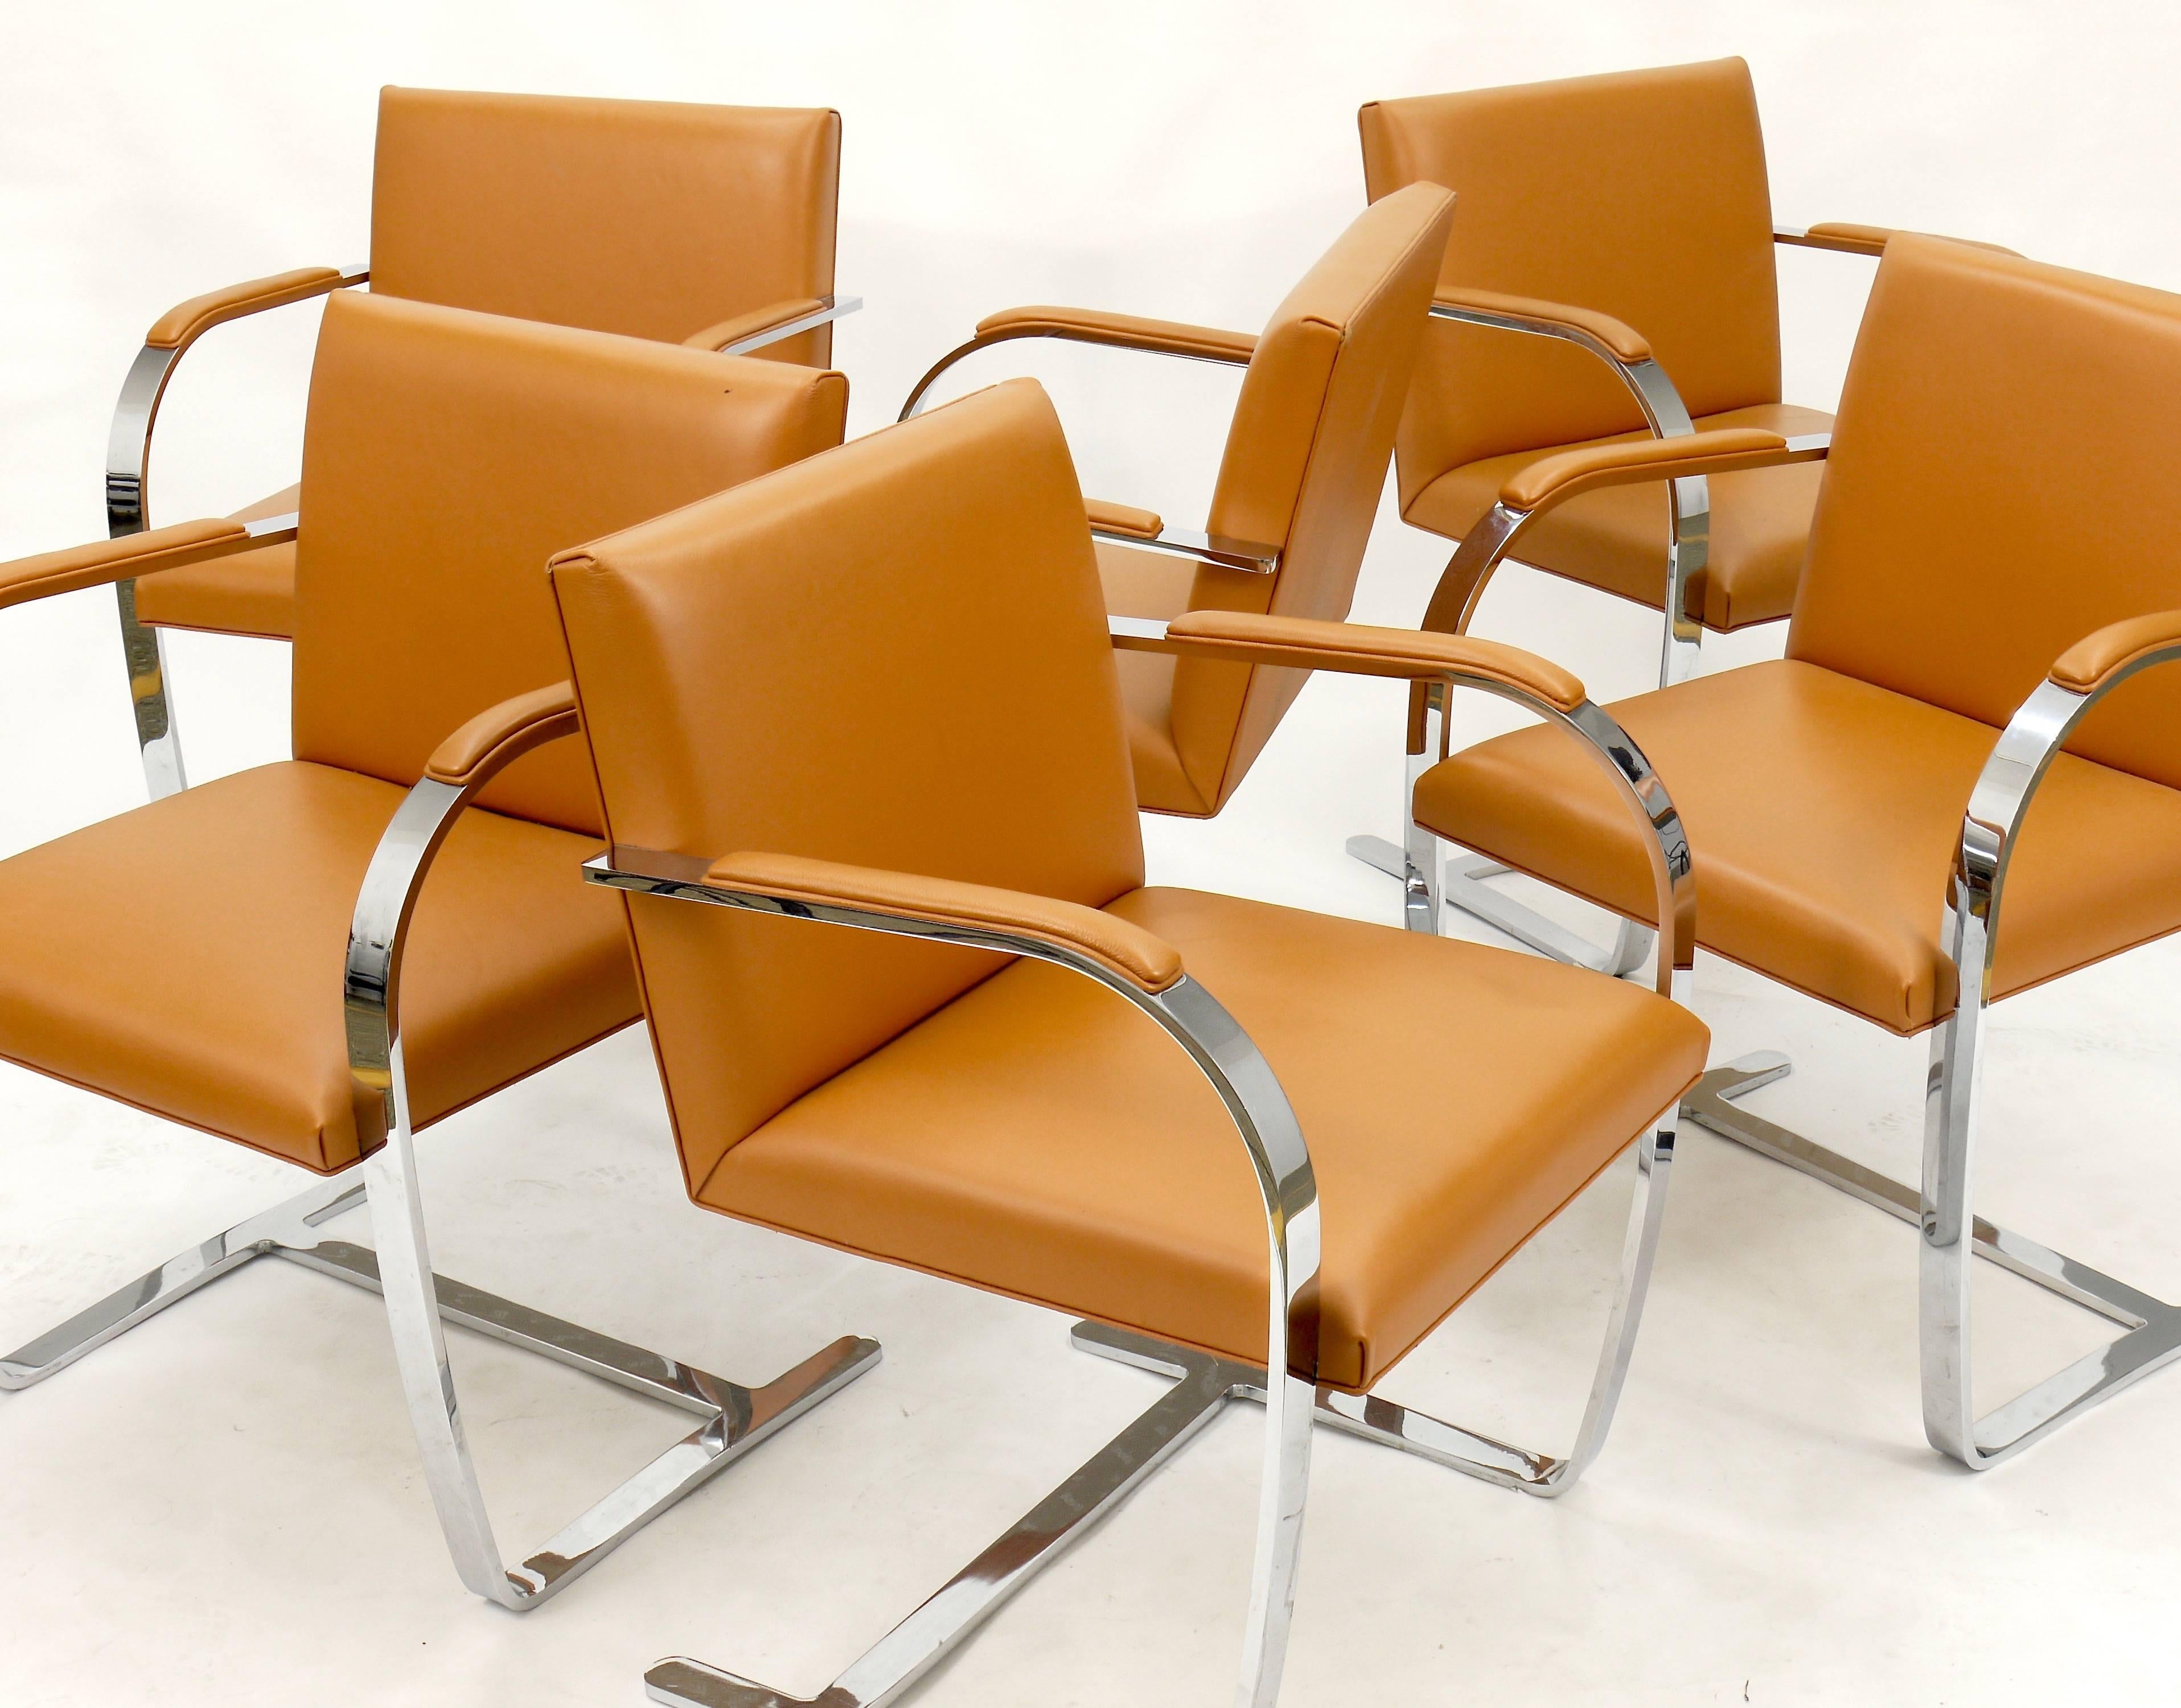 20th Century Six Cognac Brno Leather Chairs by Ludwig Mies van der Rohe, Knoll